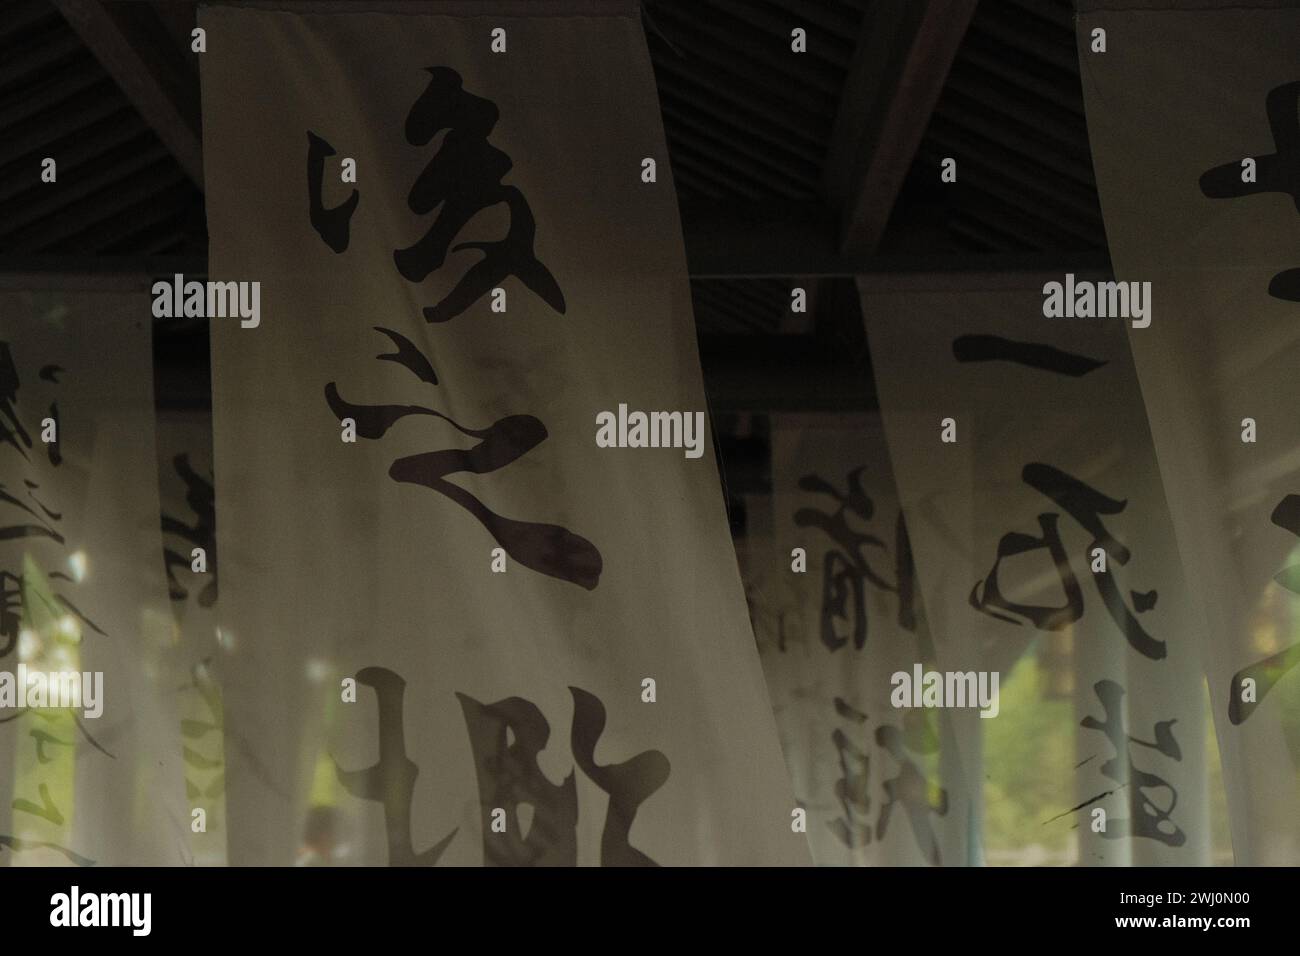 A Chinese calligraphy written on white gauzes hanging from the ceiling of a traditional chinese pavilion Stock Photo